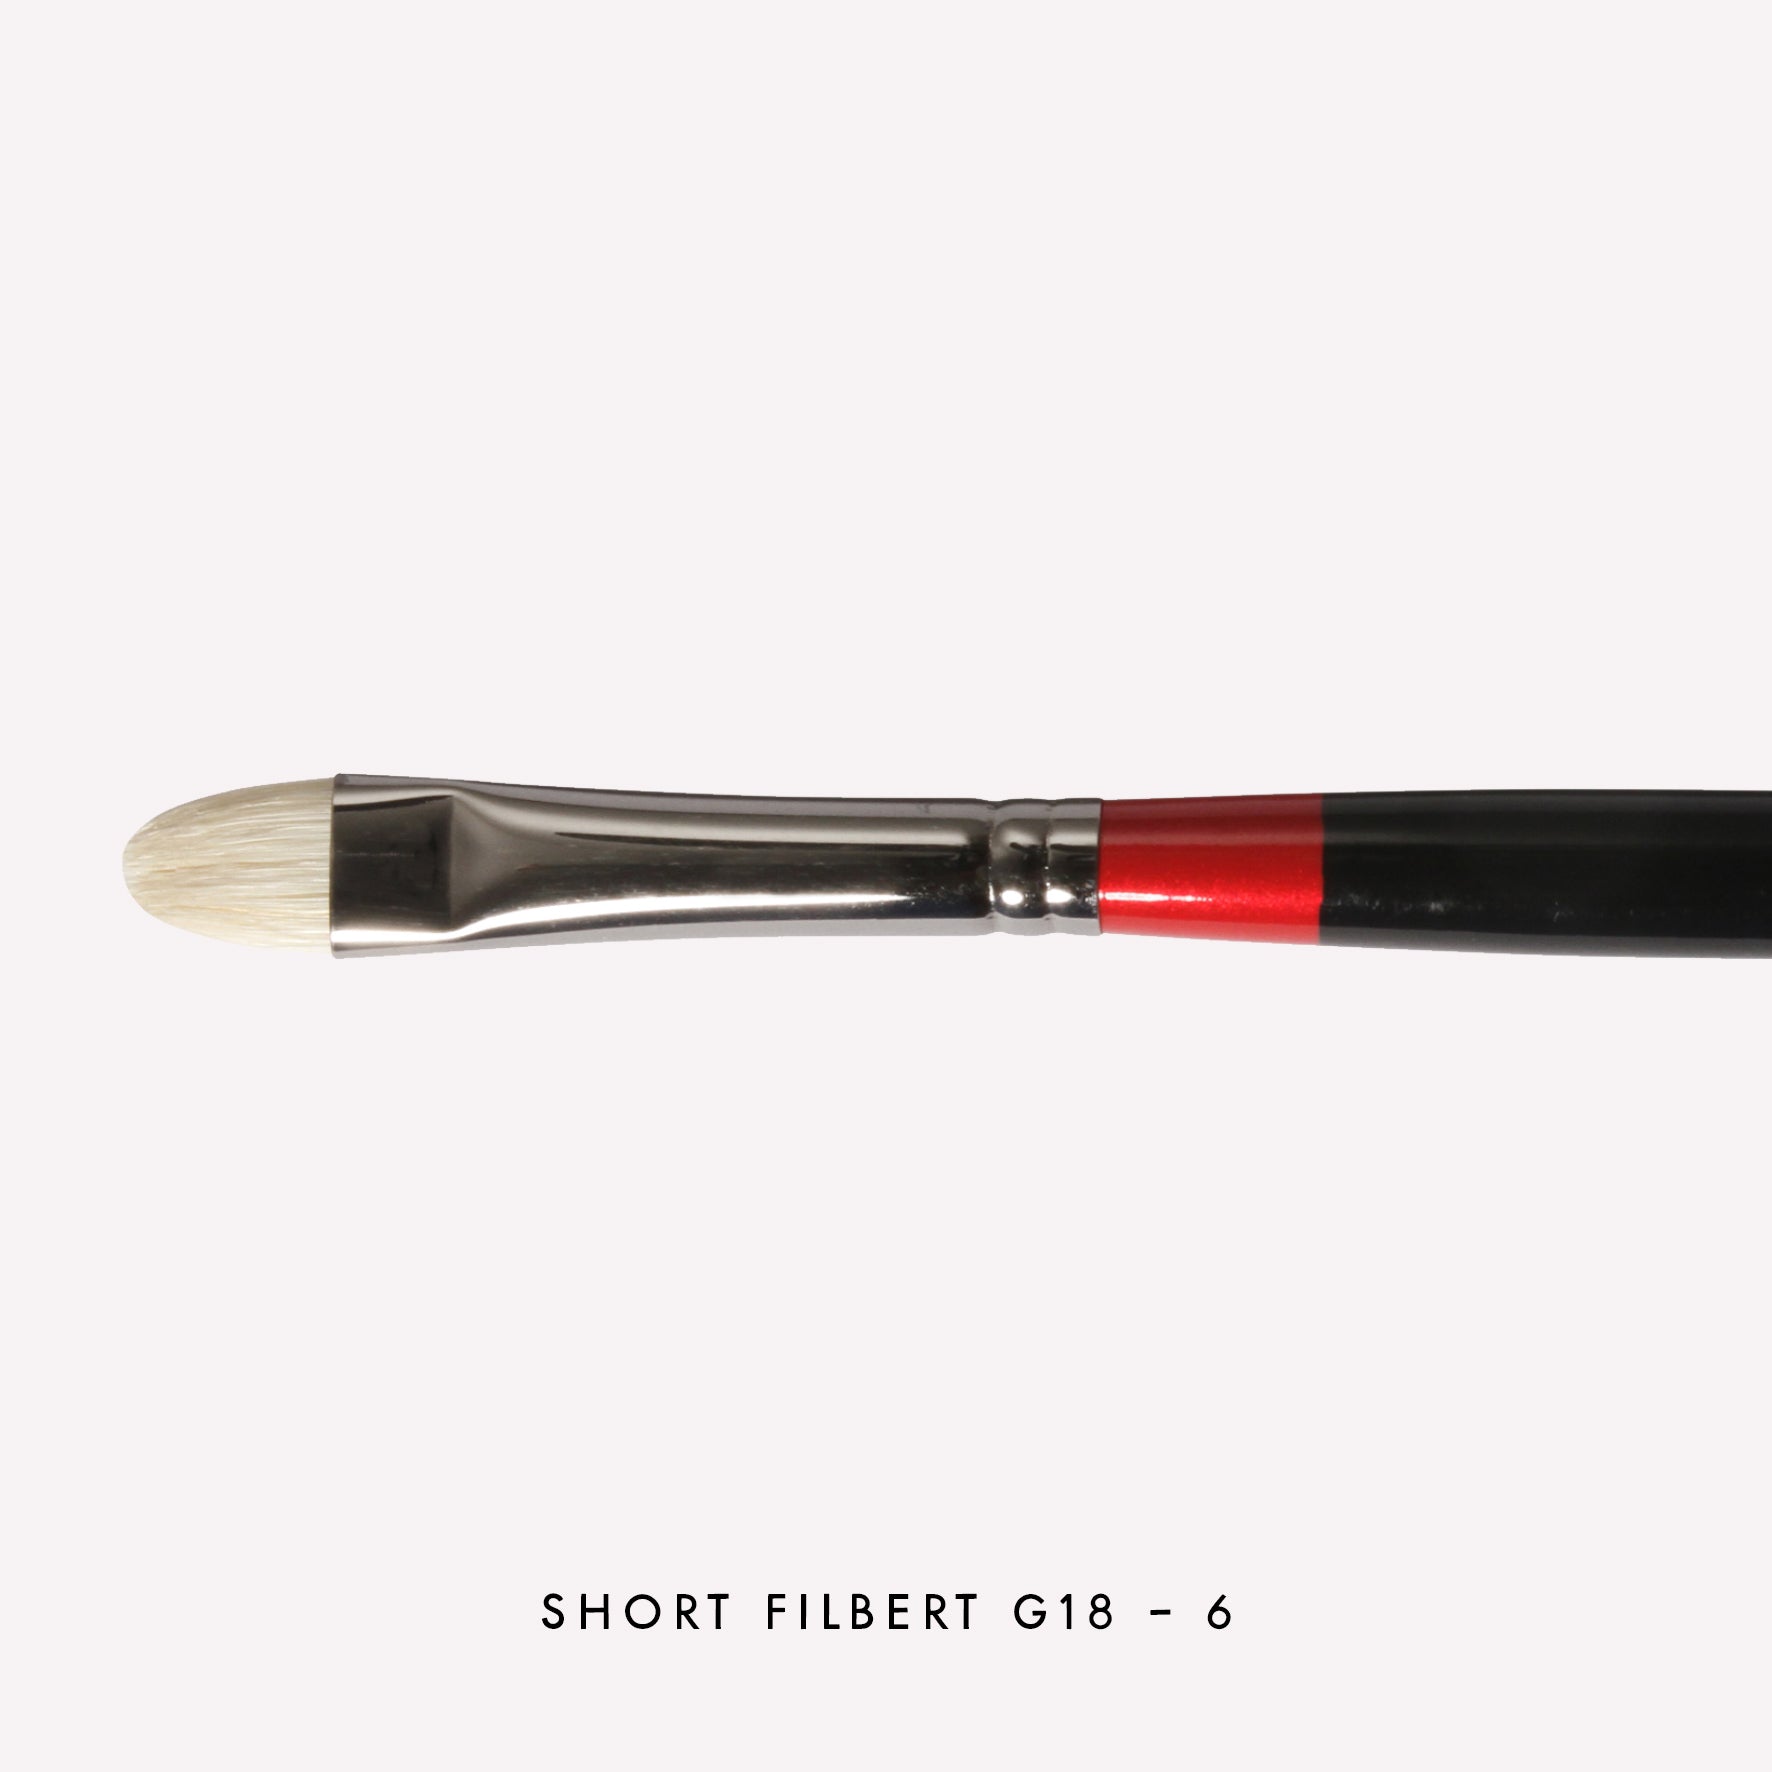 Daler-Rowney Georgian Filbert paintbrush in size G18-6 . Brushes have a classy black handle with red detailing and a silver ferrule. 